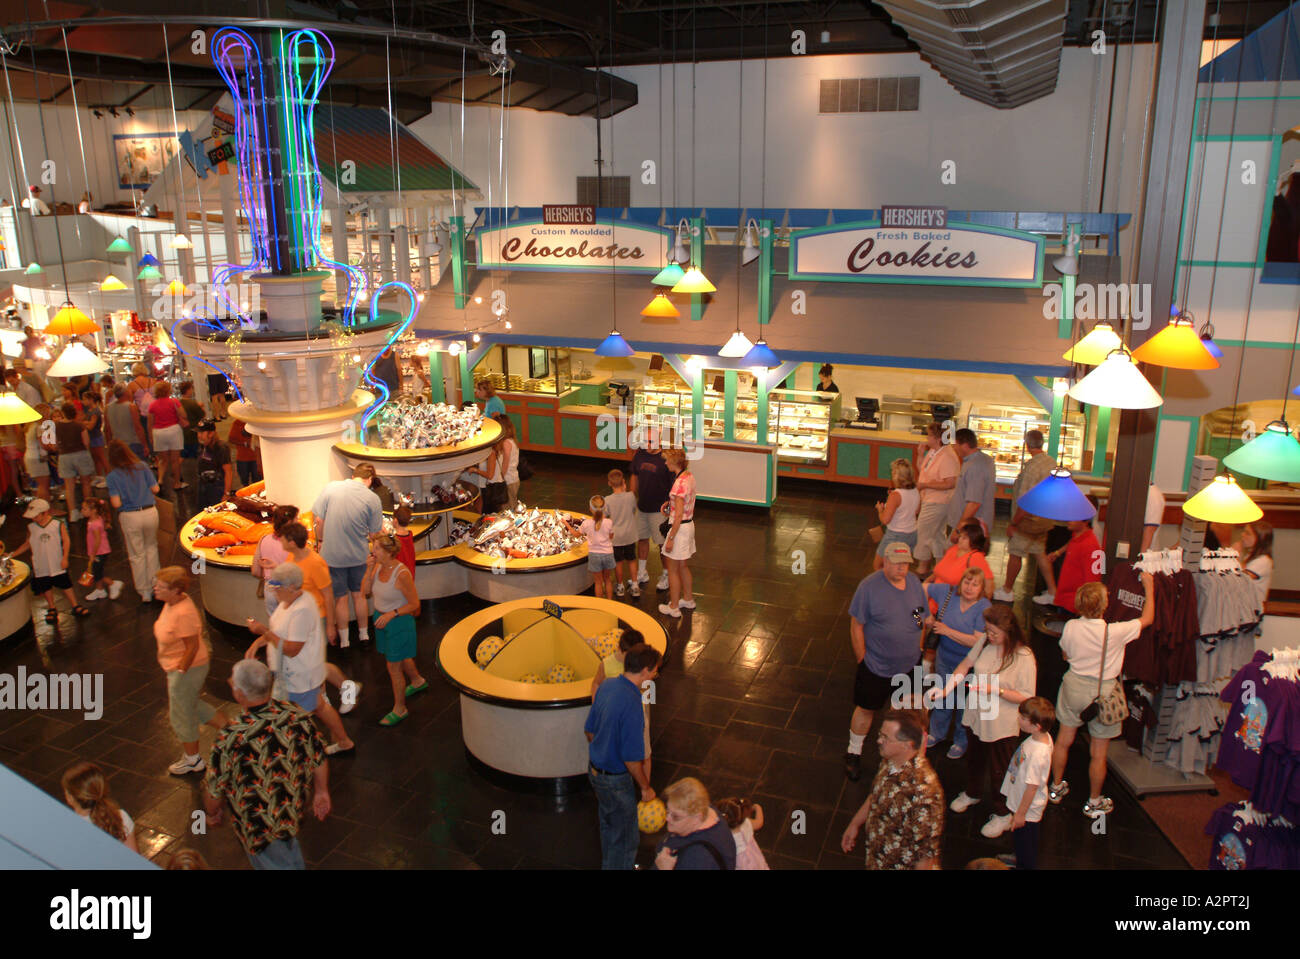 Guests shop for chocolate products as well as apparel and clothing in Hershey s Chocolate World Stock Photo